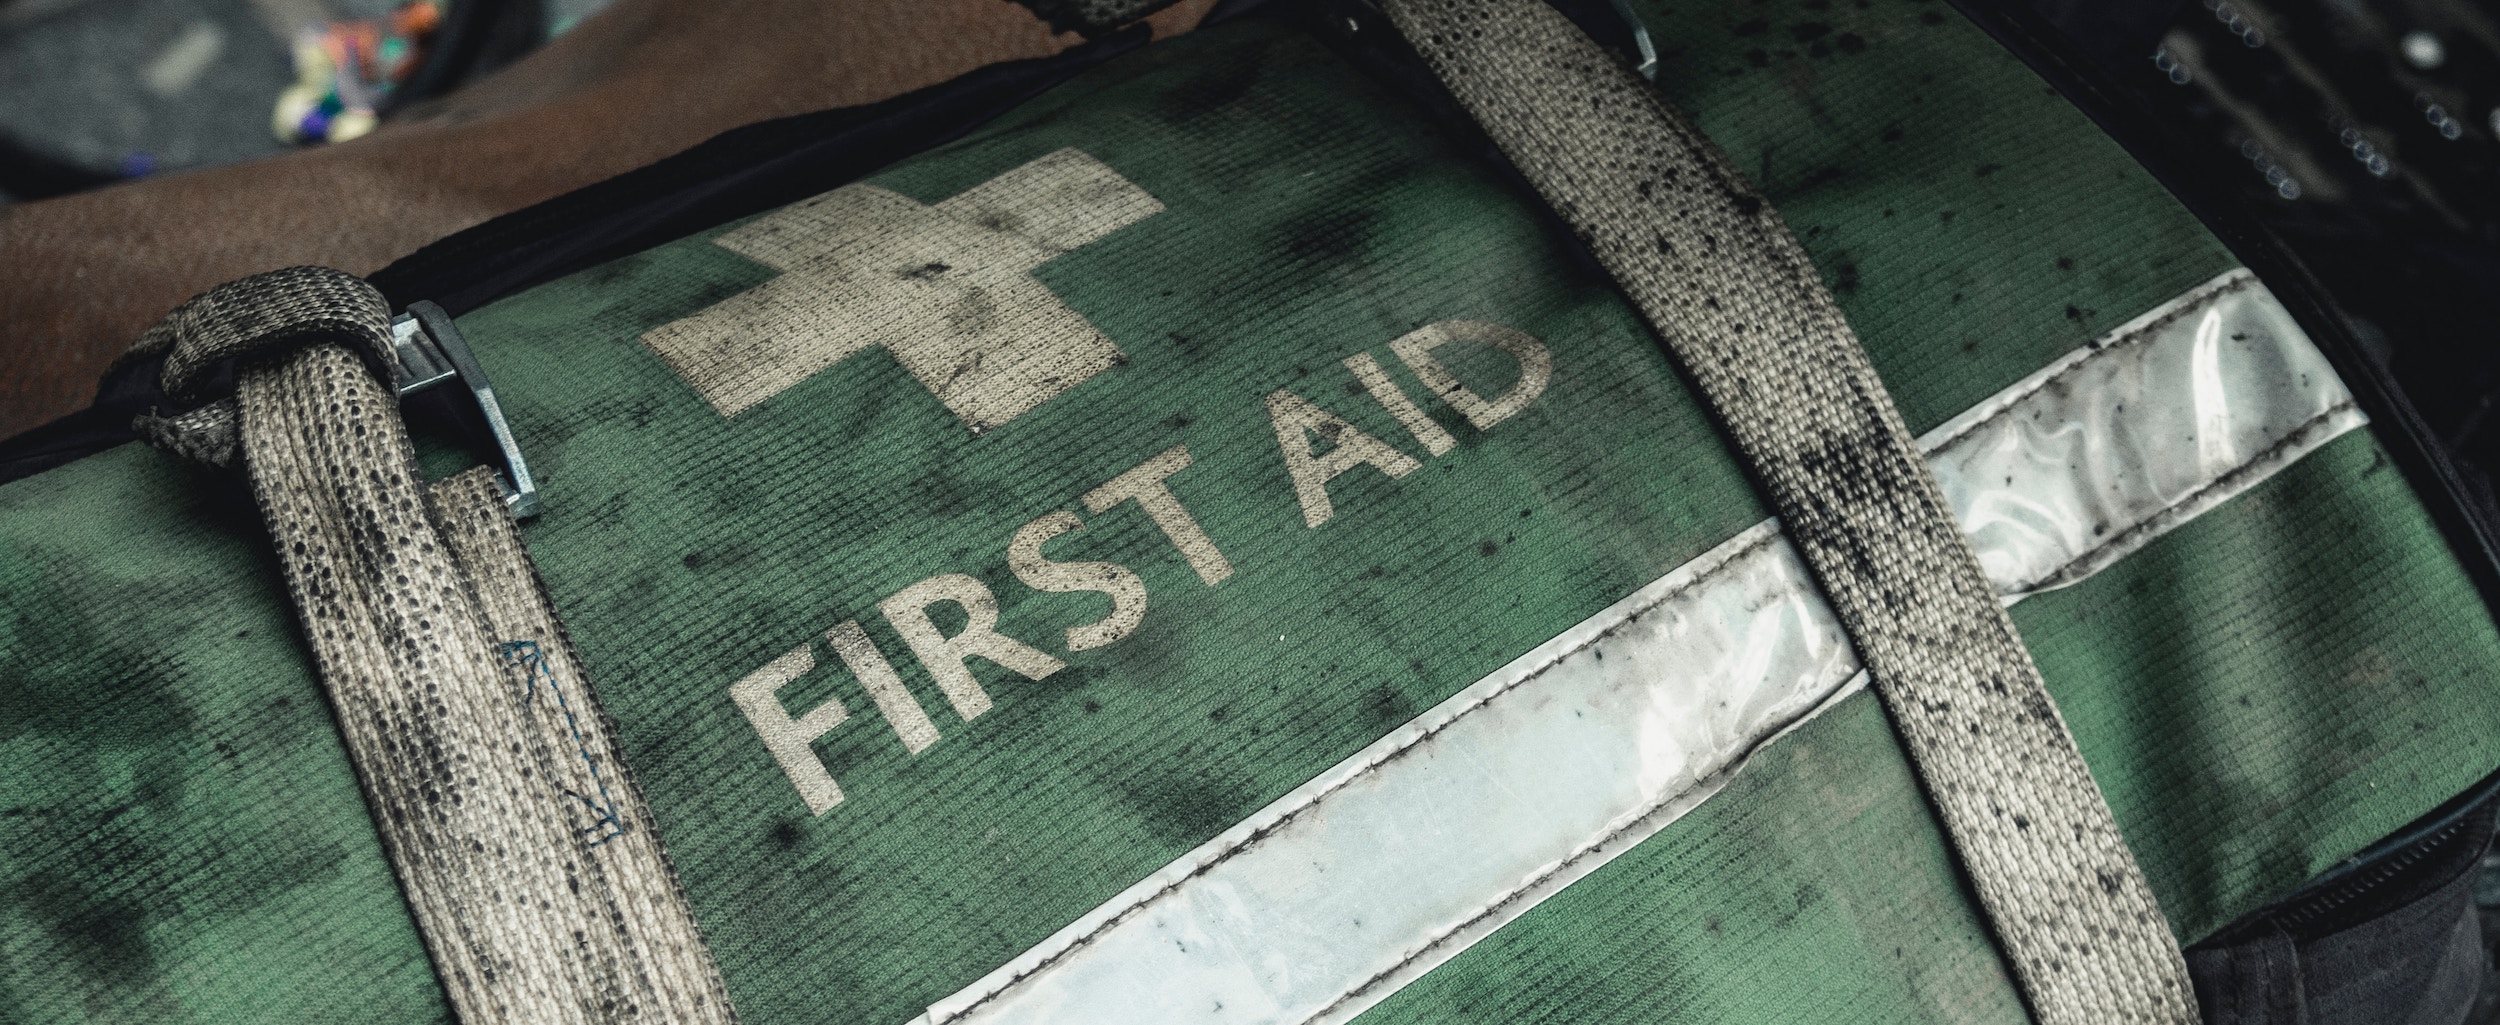 First-Aid Certification